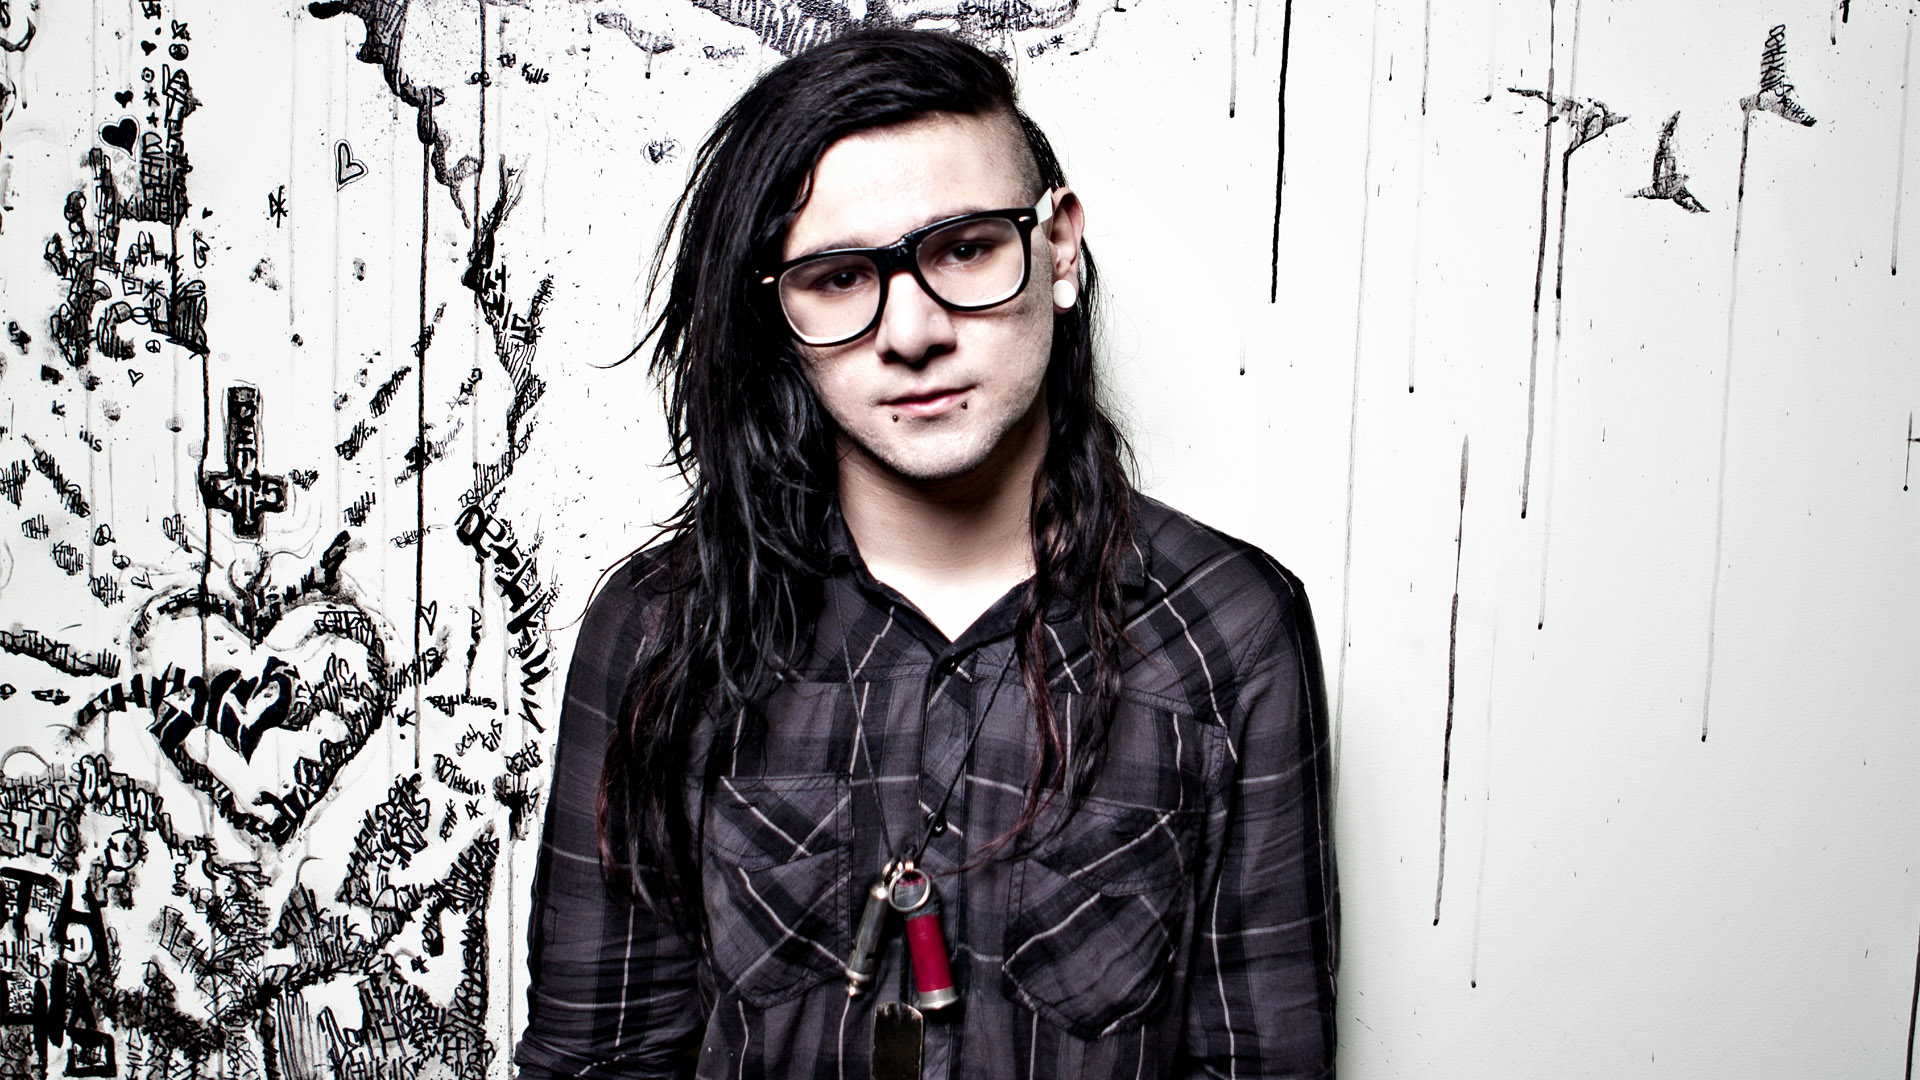 Skrillex – aka Sonny Moore  – cut his teeth in traditional band culture,  then reinvented himself pushing new, alien sounds in Los Angeles. Photo: Courtesy of Music Times